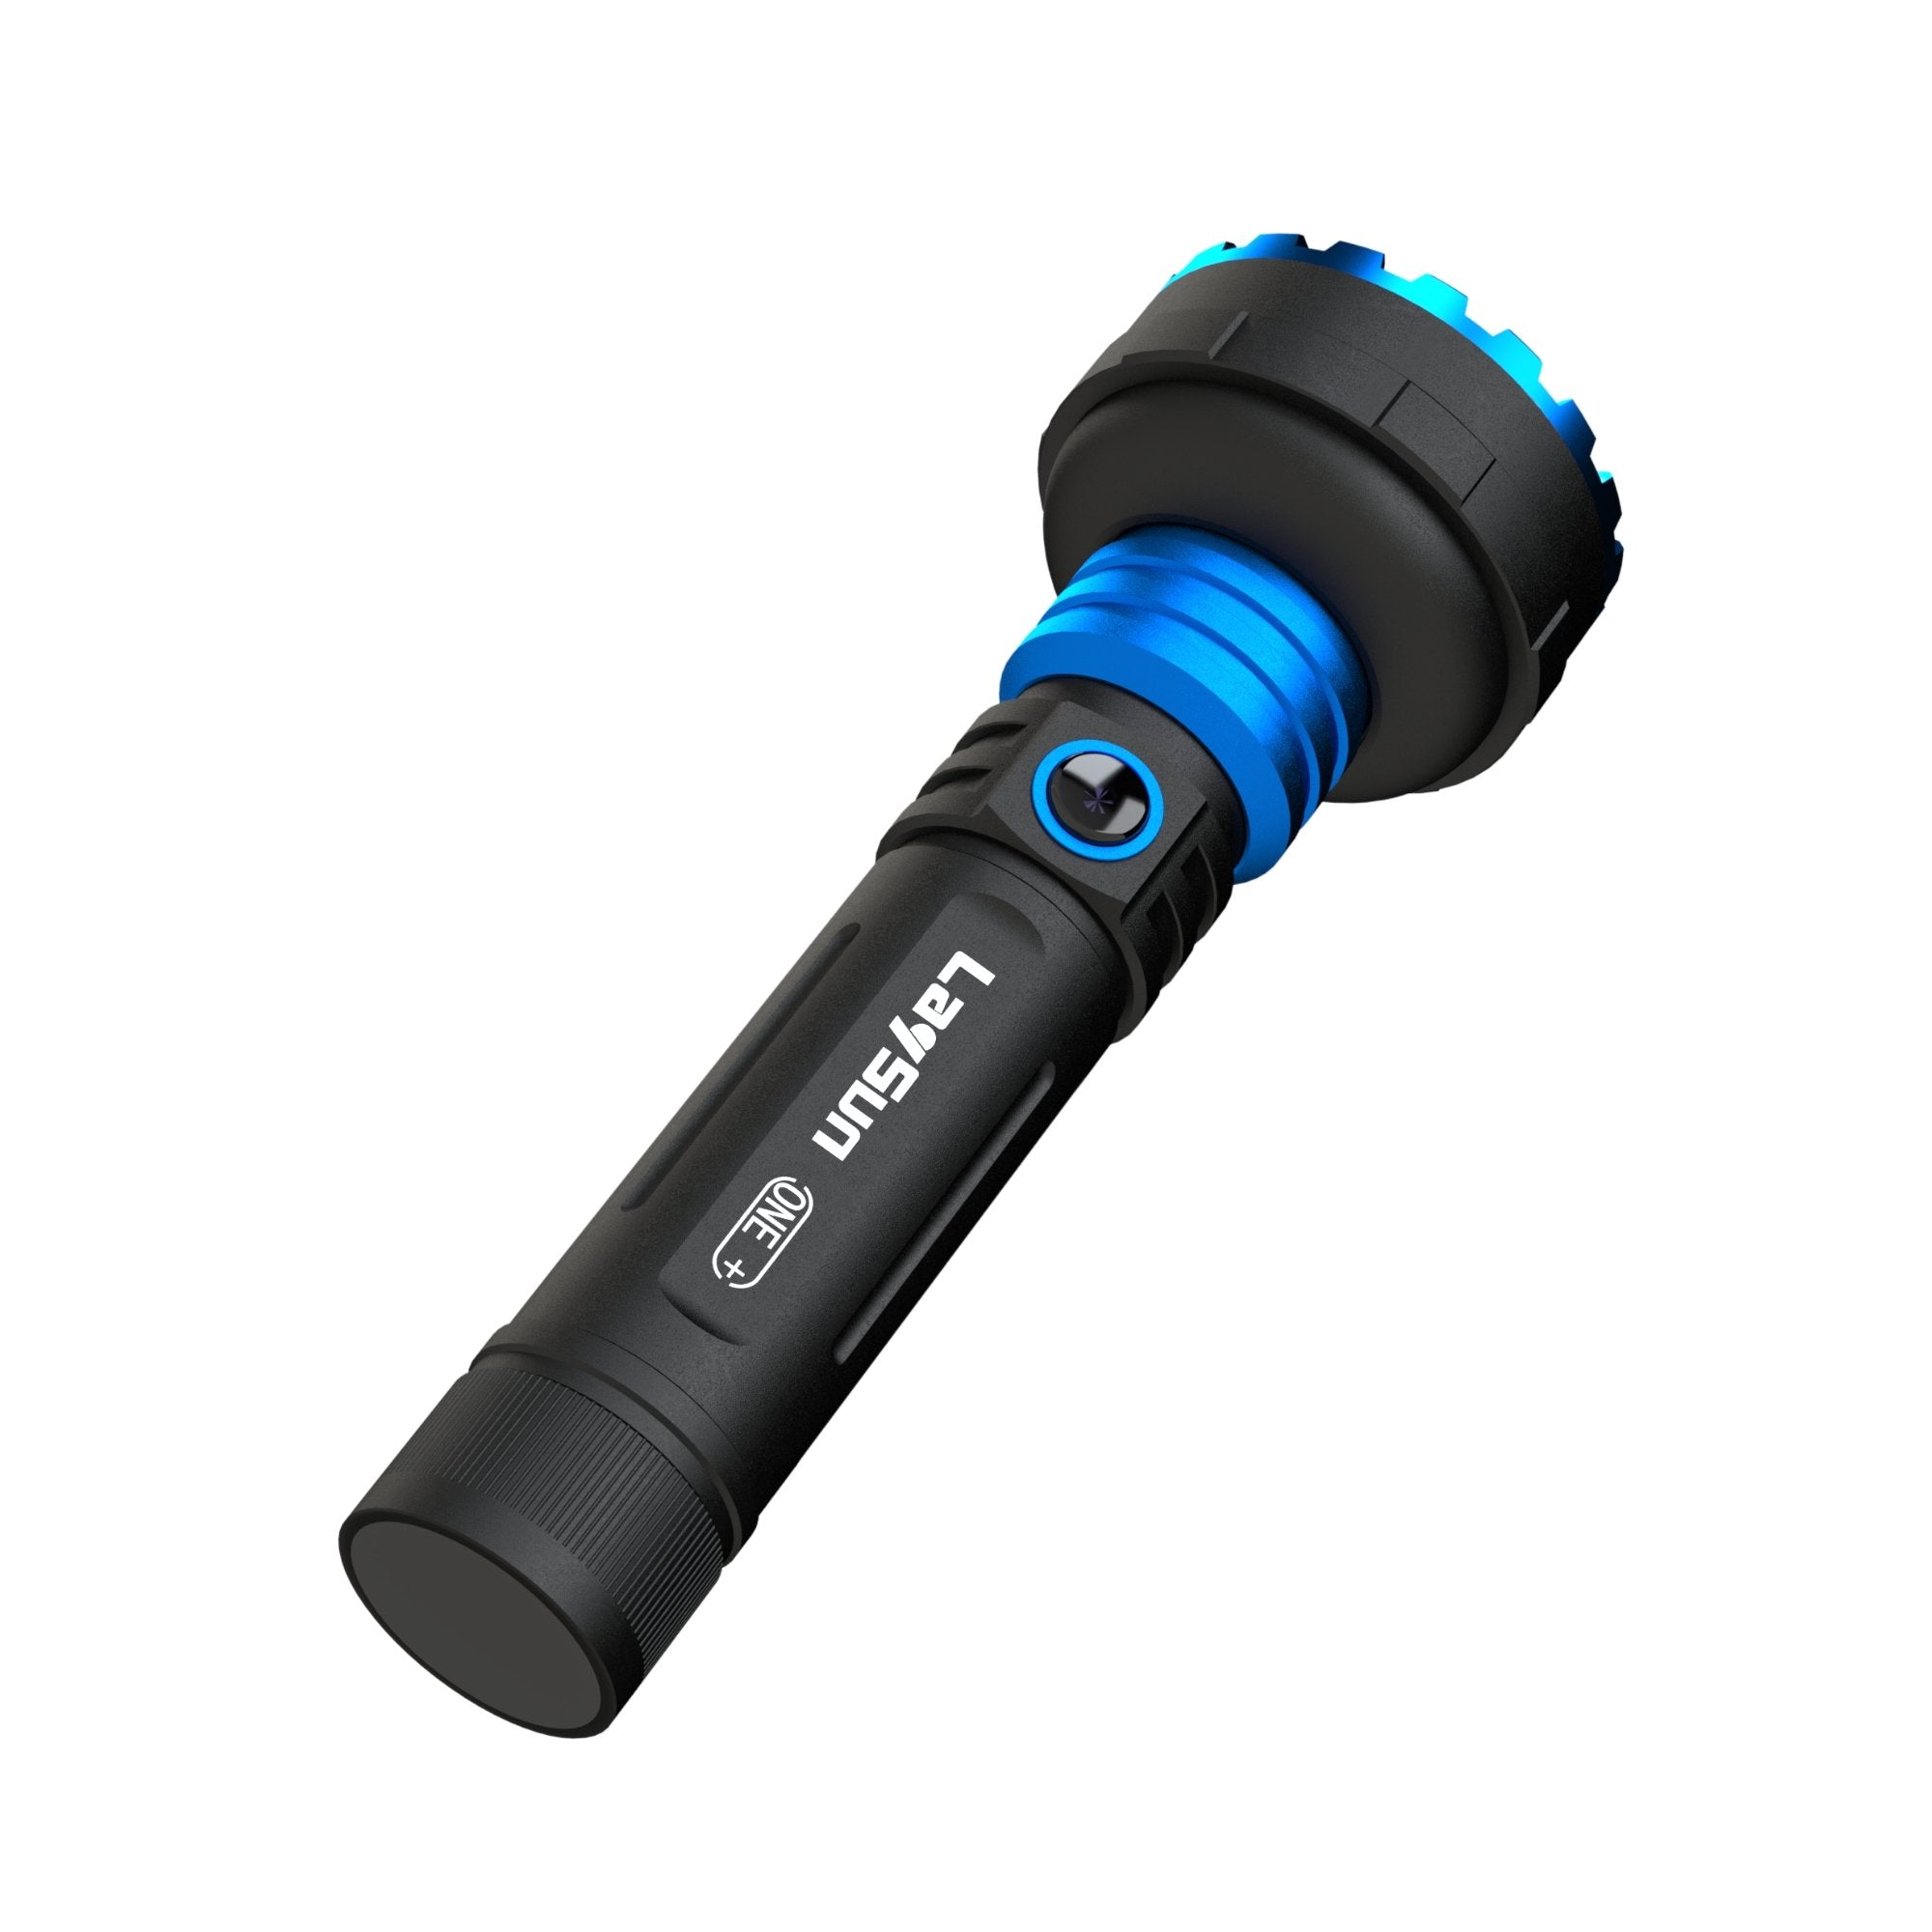 LaySun Quick Connect Rechargeable UV LED Flashlight - LaySun Smart